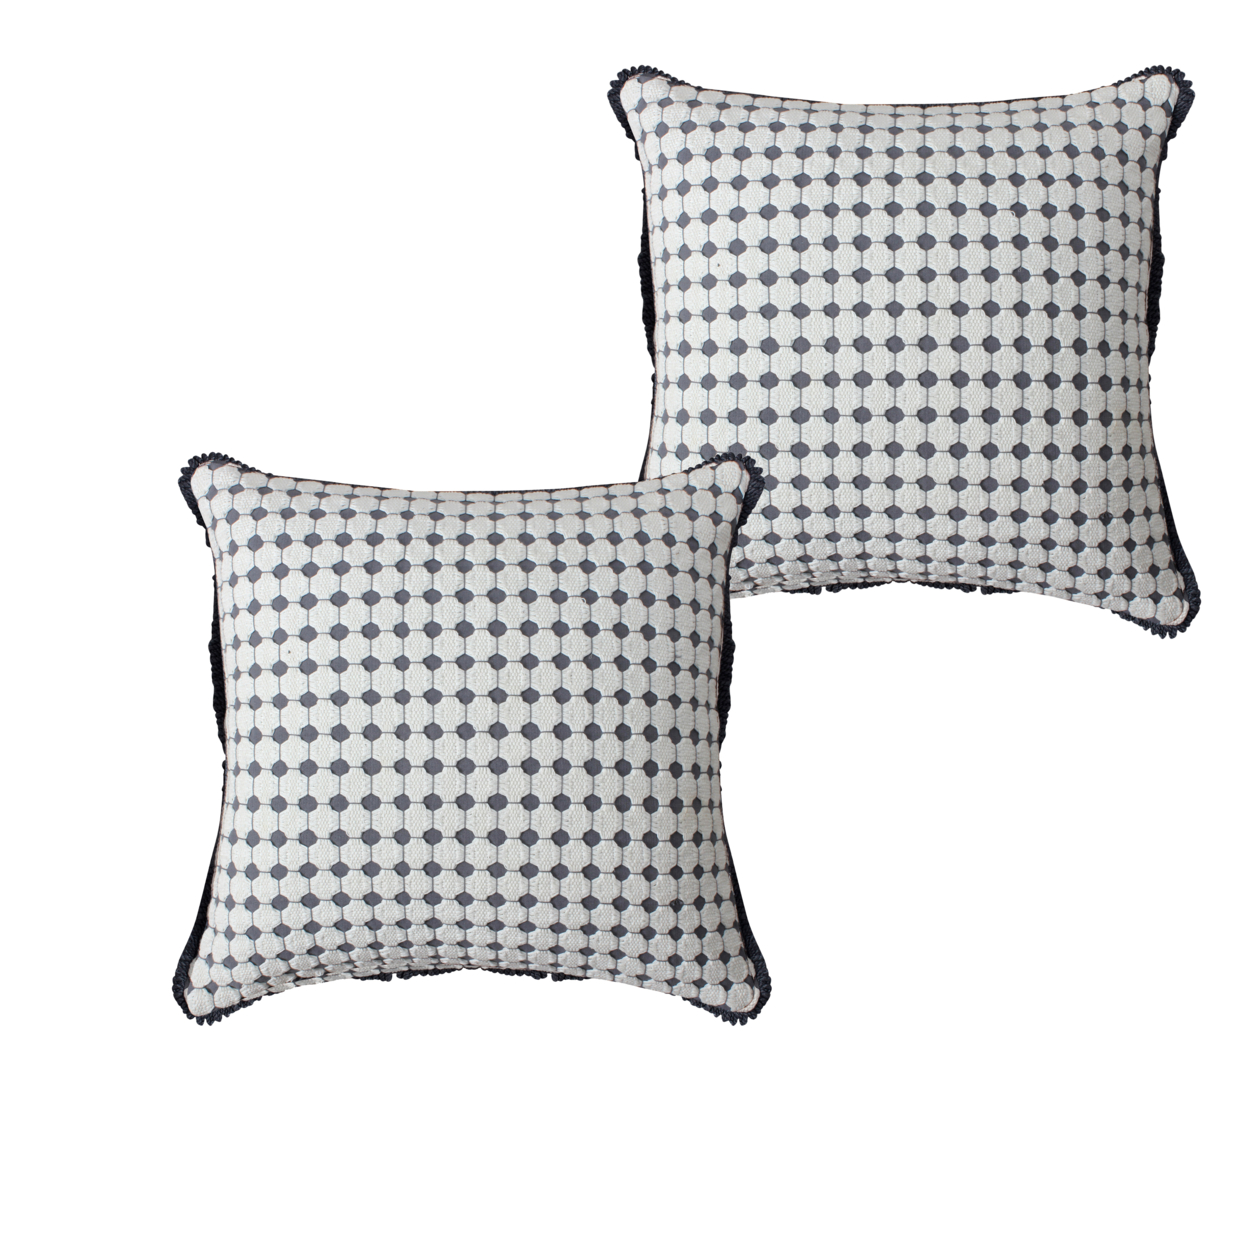 18 X 18 Handcrafted Square Cotton Accent Throw Pillow, Woven, Dotted Tile Design, Set Of 2, White, Gray